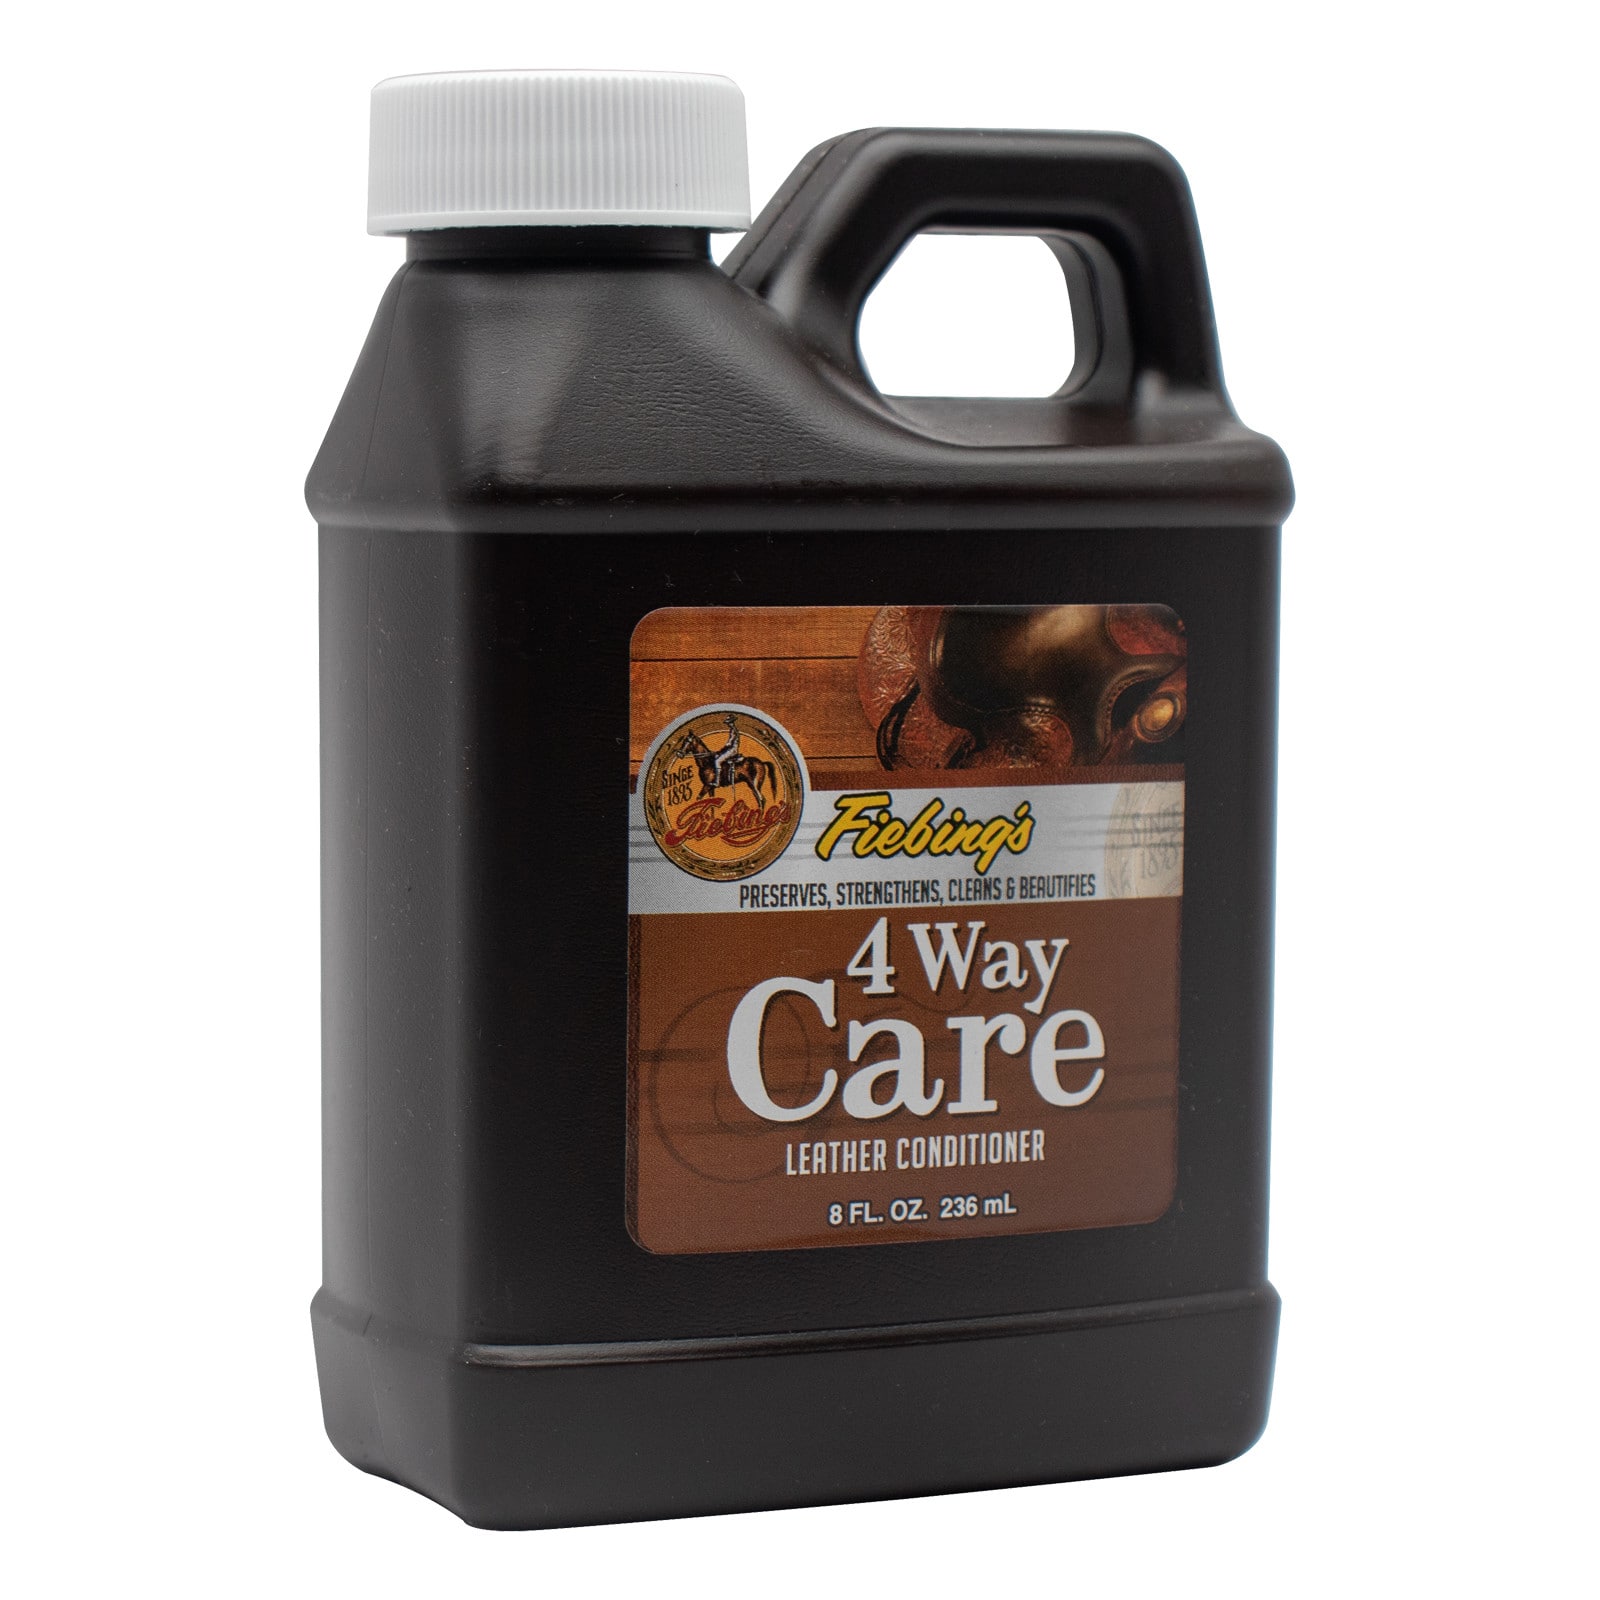 Fiebing&#x27;s 4 Way Care Leather Conditioner, 8oz.